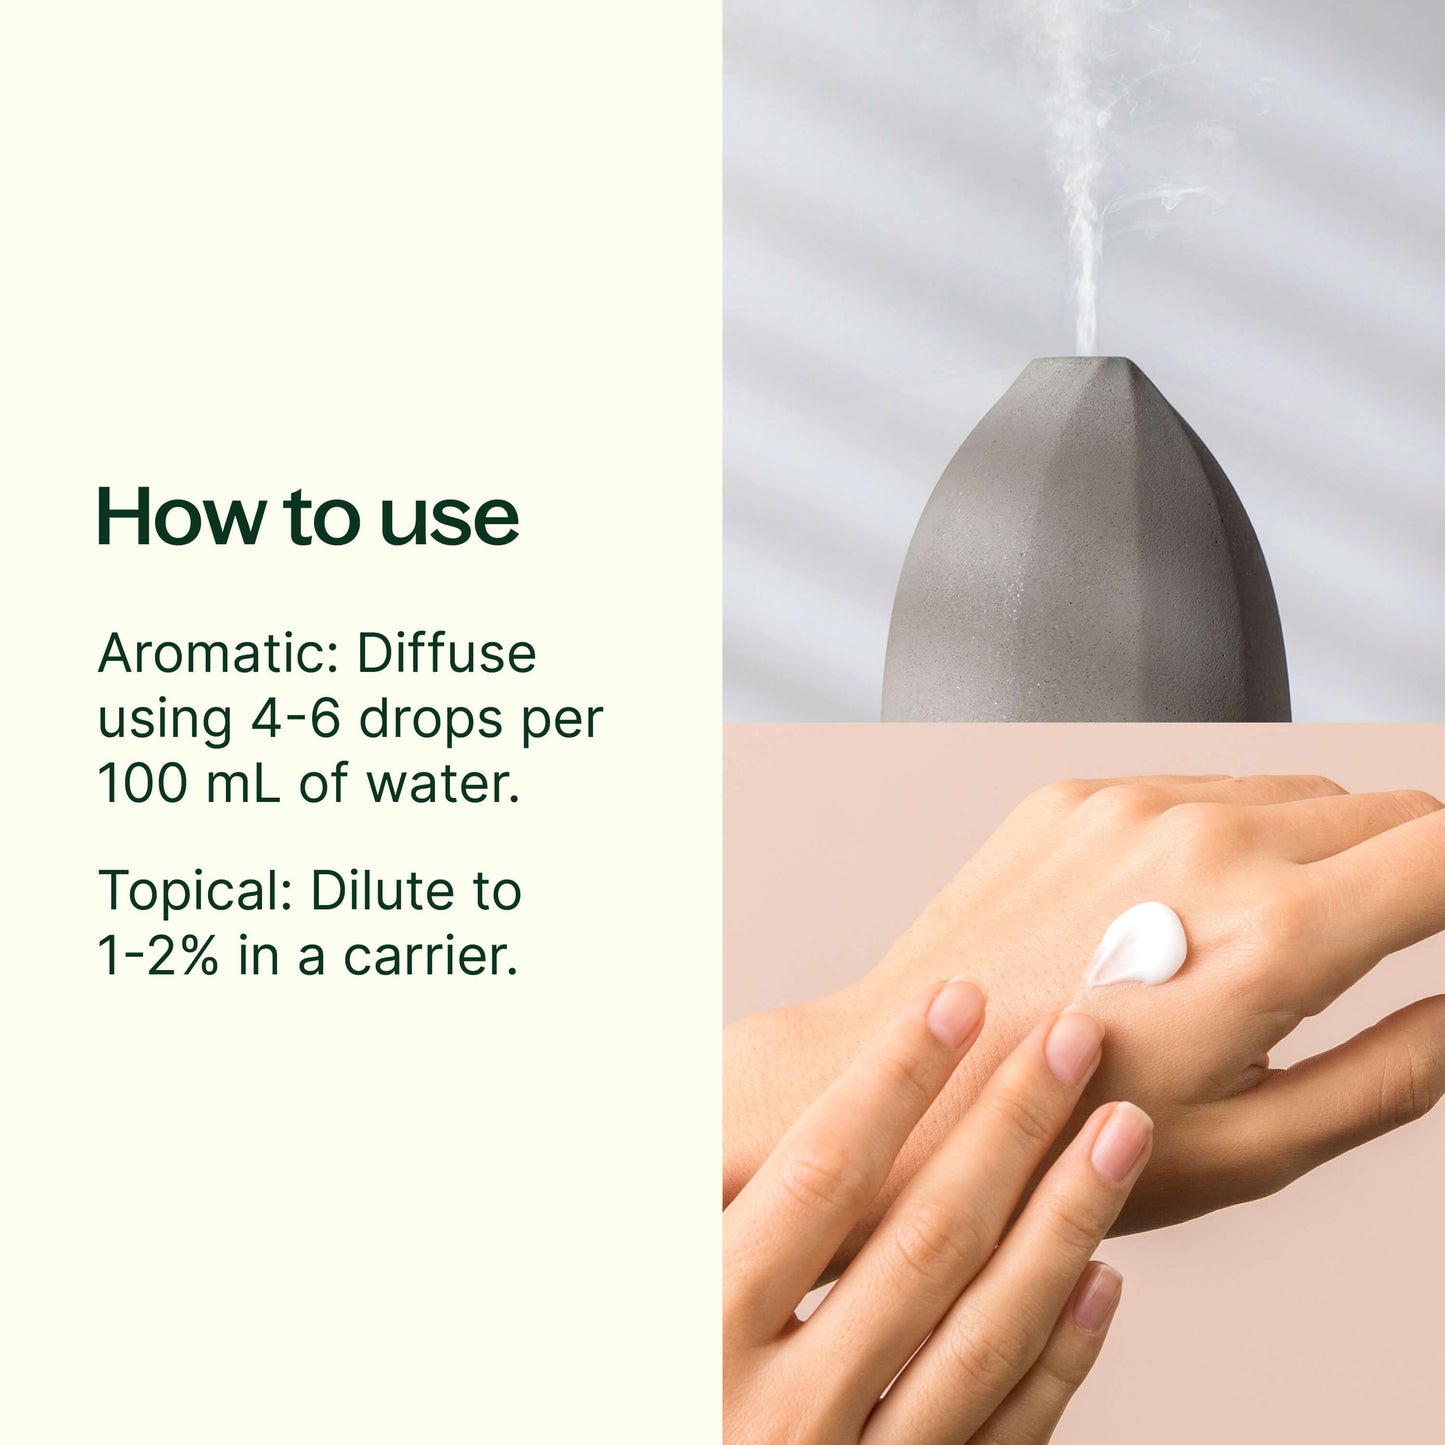 how to use: Aromatic: Diffuse using 4-6 drops per 100 mL of water. Topical: Dilute to 1-2% in a carrier.